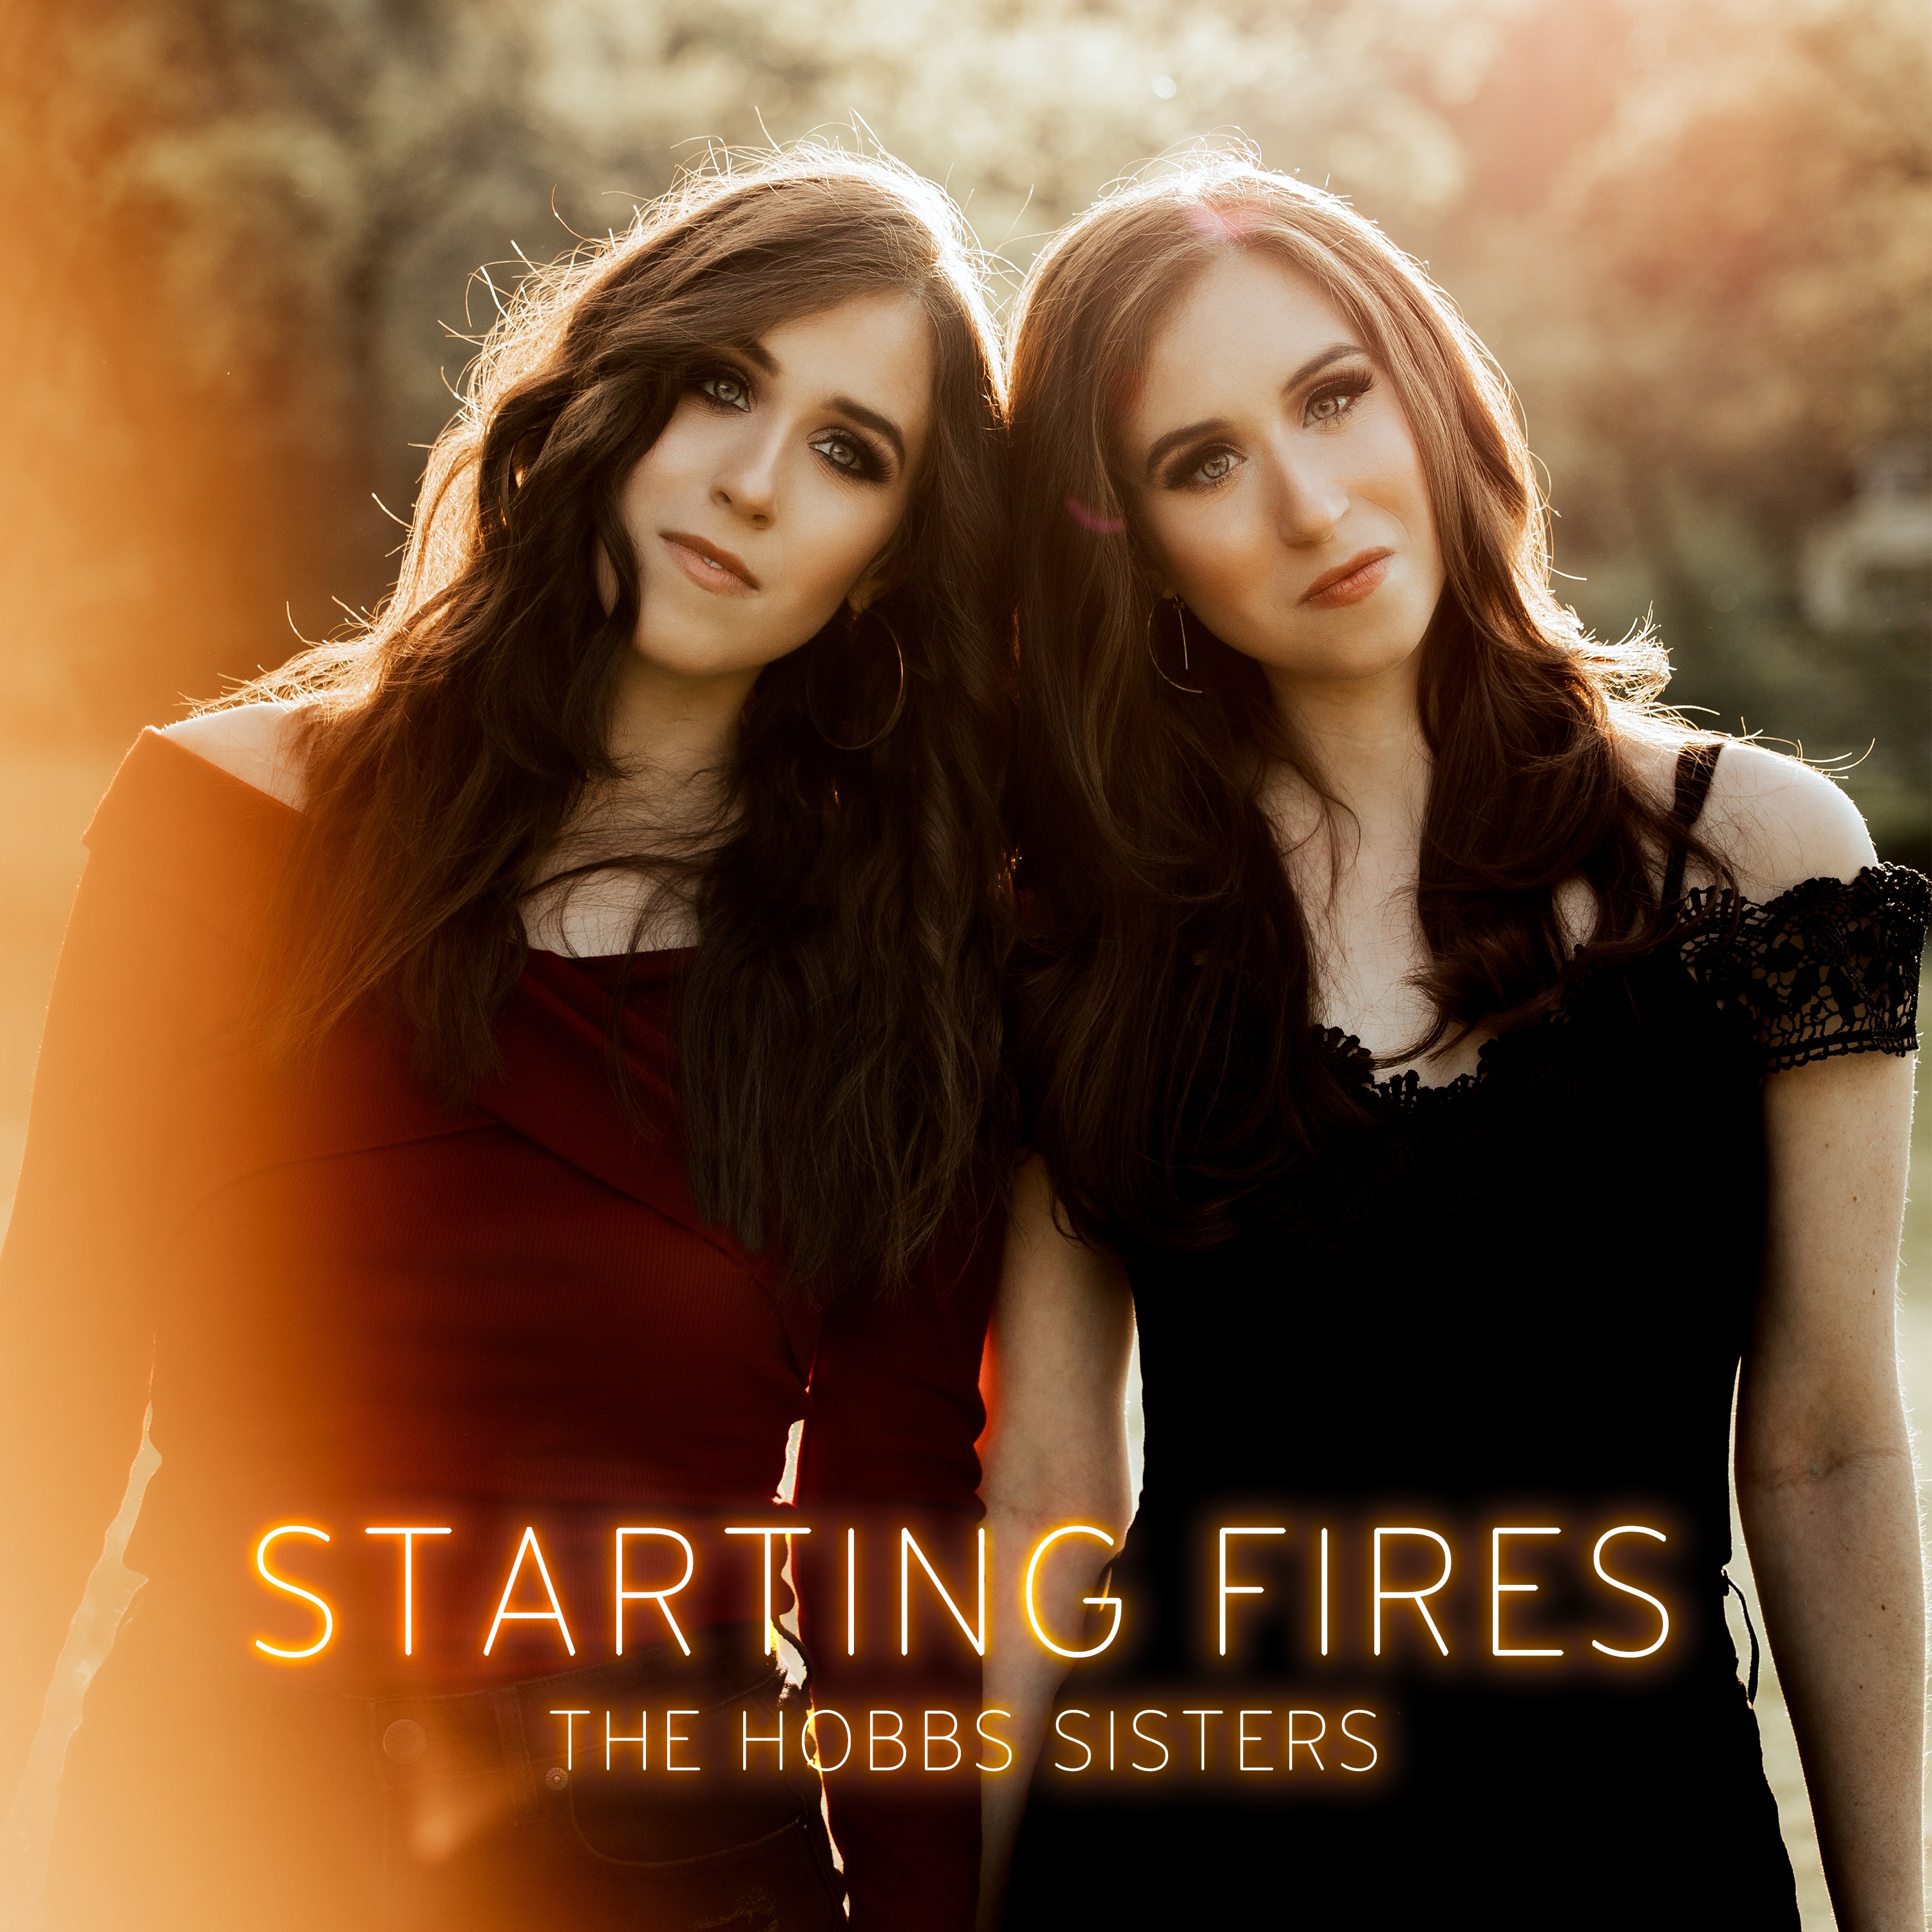 The Hobbs Sisters Release New Single “Starting Fires”